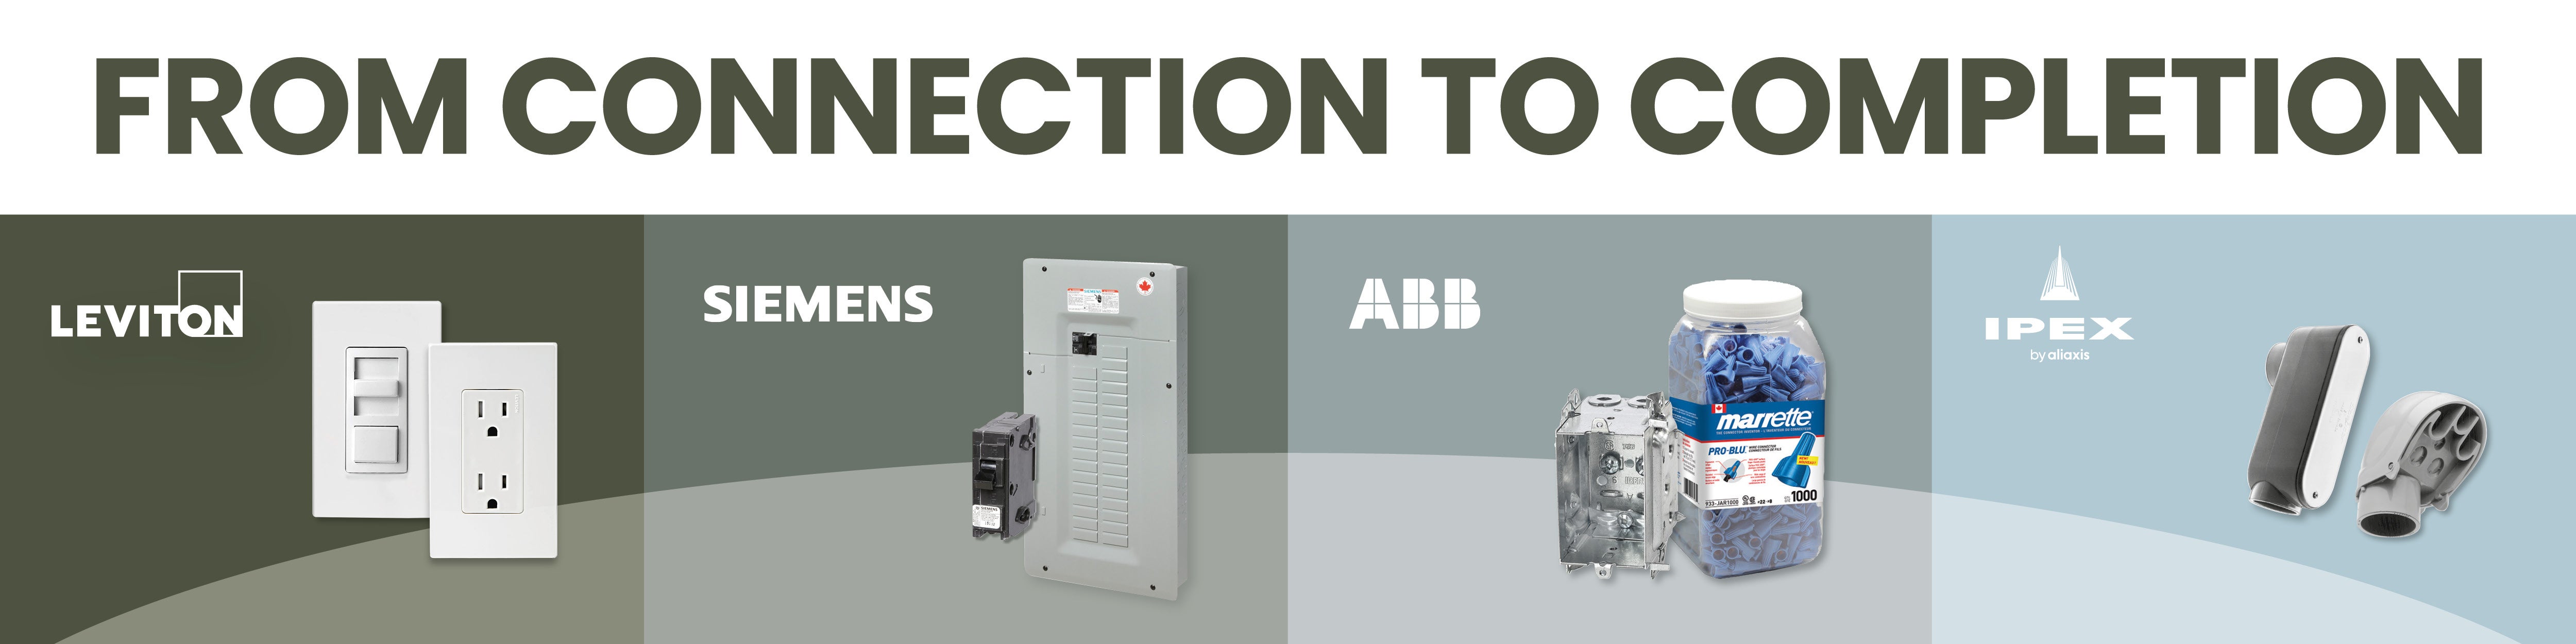 From connection to completion Leviton Siemens ABB Ipex